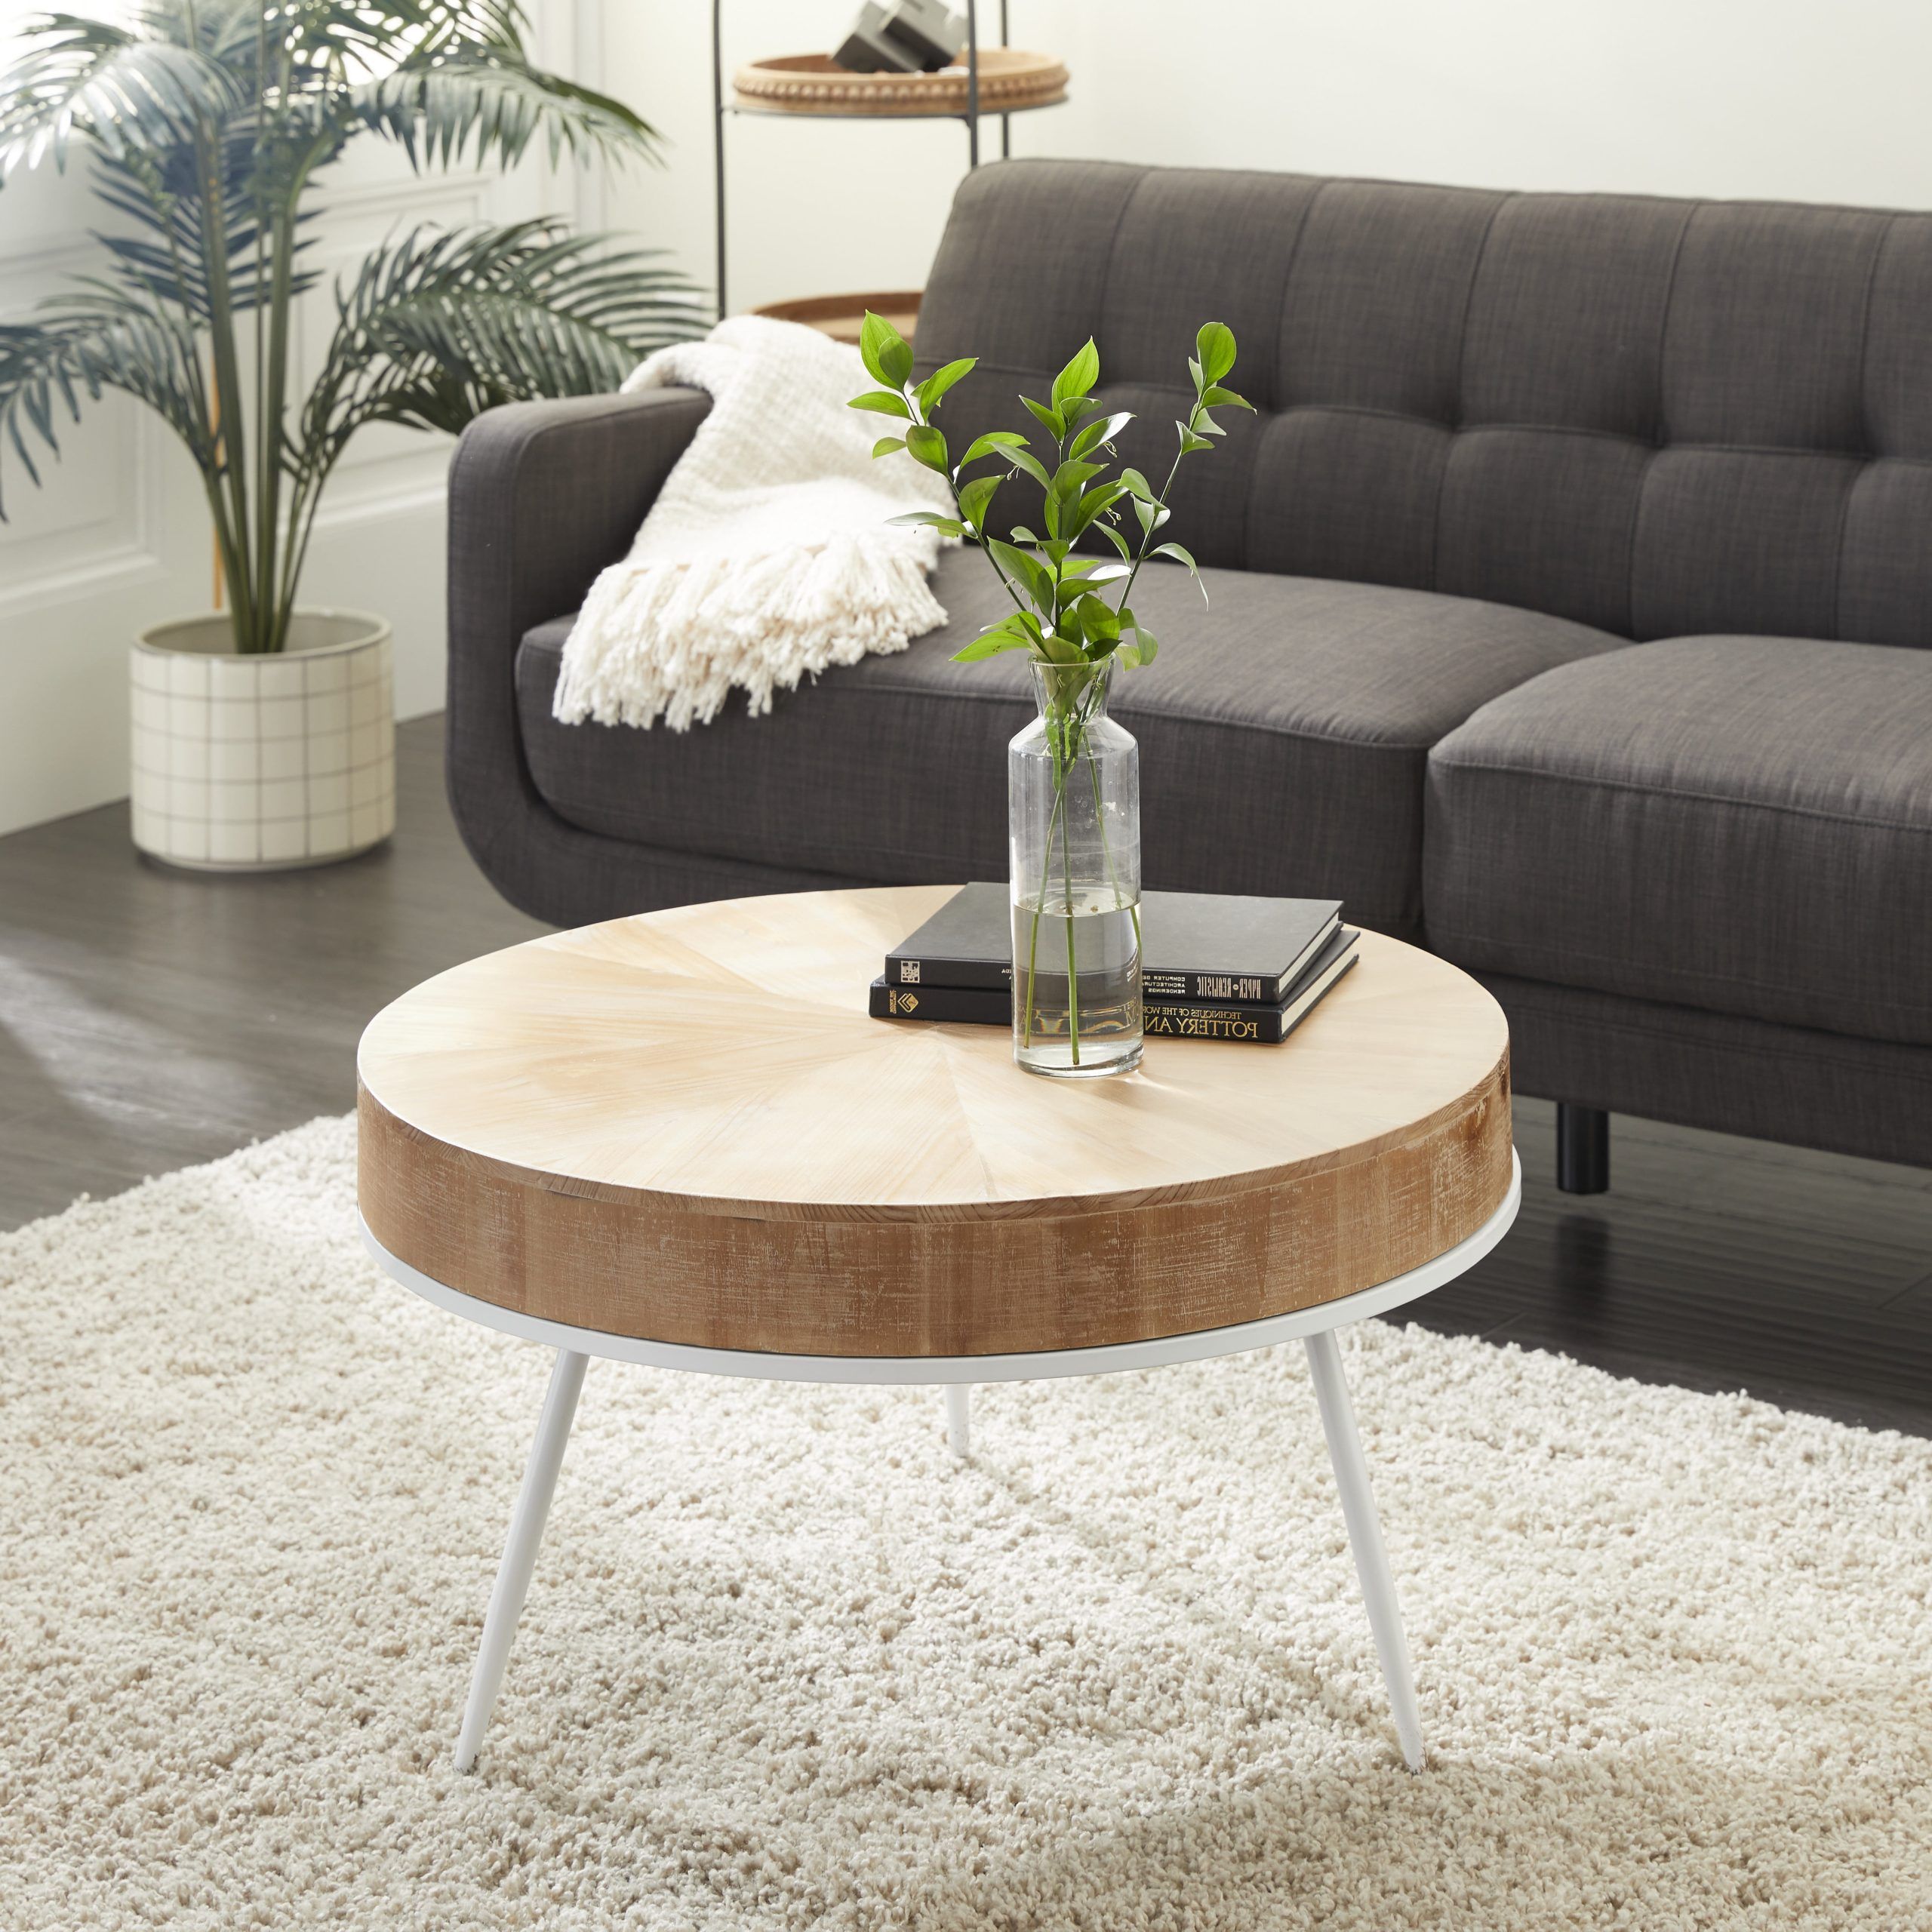 Decmode Round Natural Wood Top Coffee Table With Distressed White Metal Inside White T Base Seminar Coffee Tables (Gallery 6 of 20)